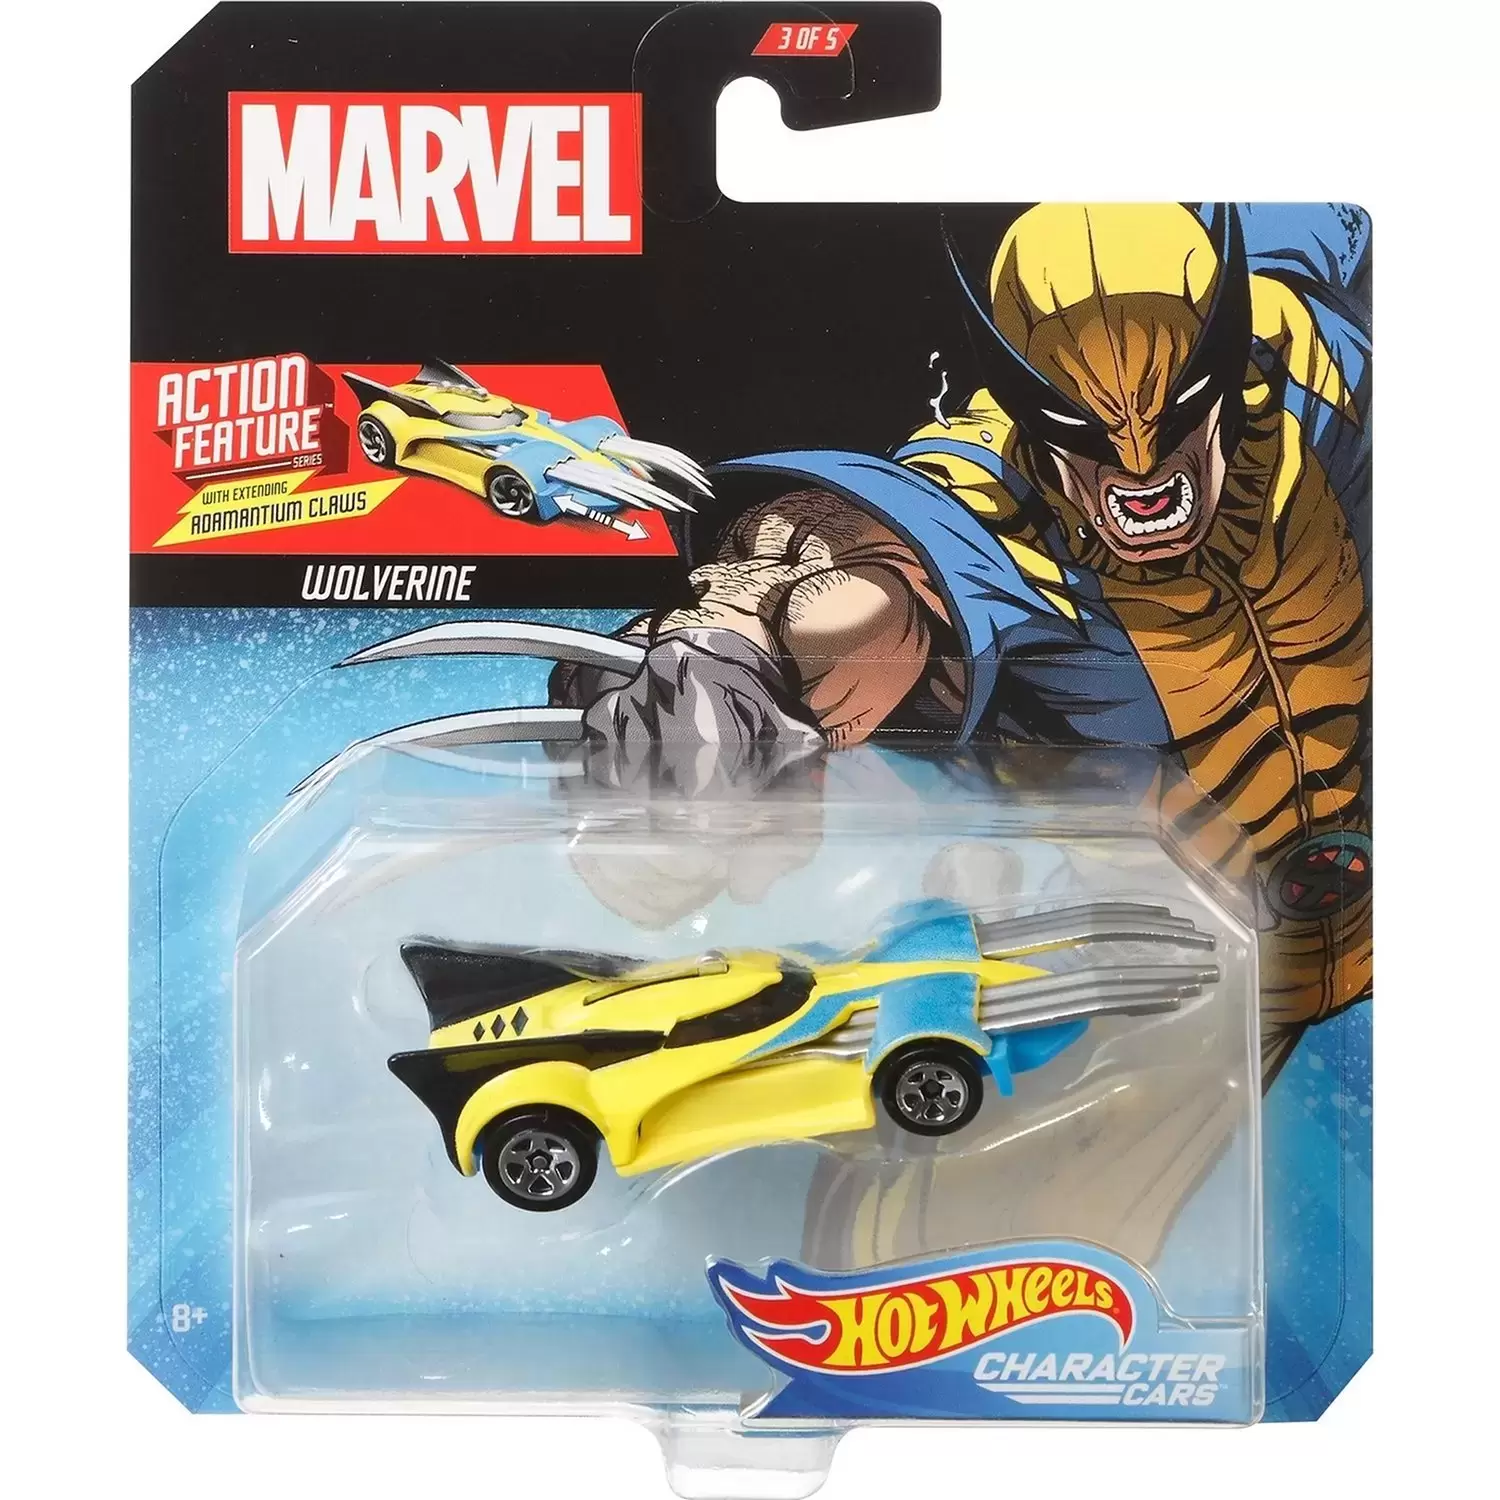 Marvel Character Cars - Action Feature Series - Wolverine